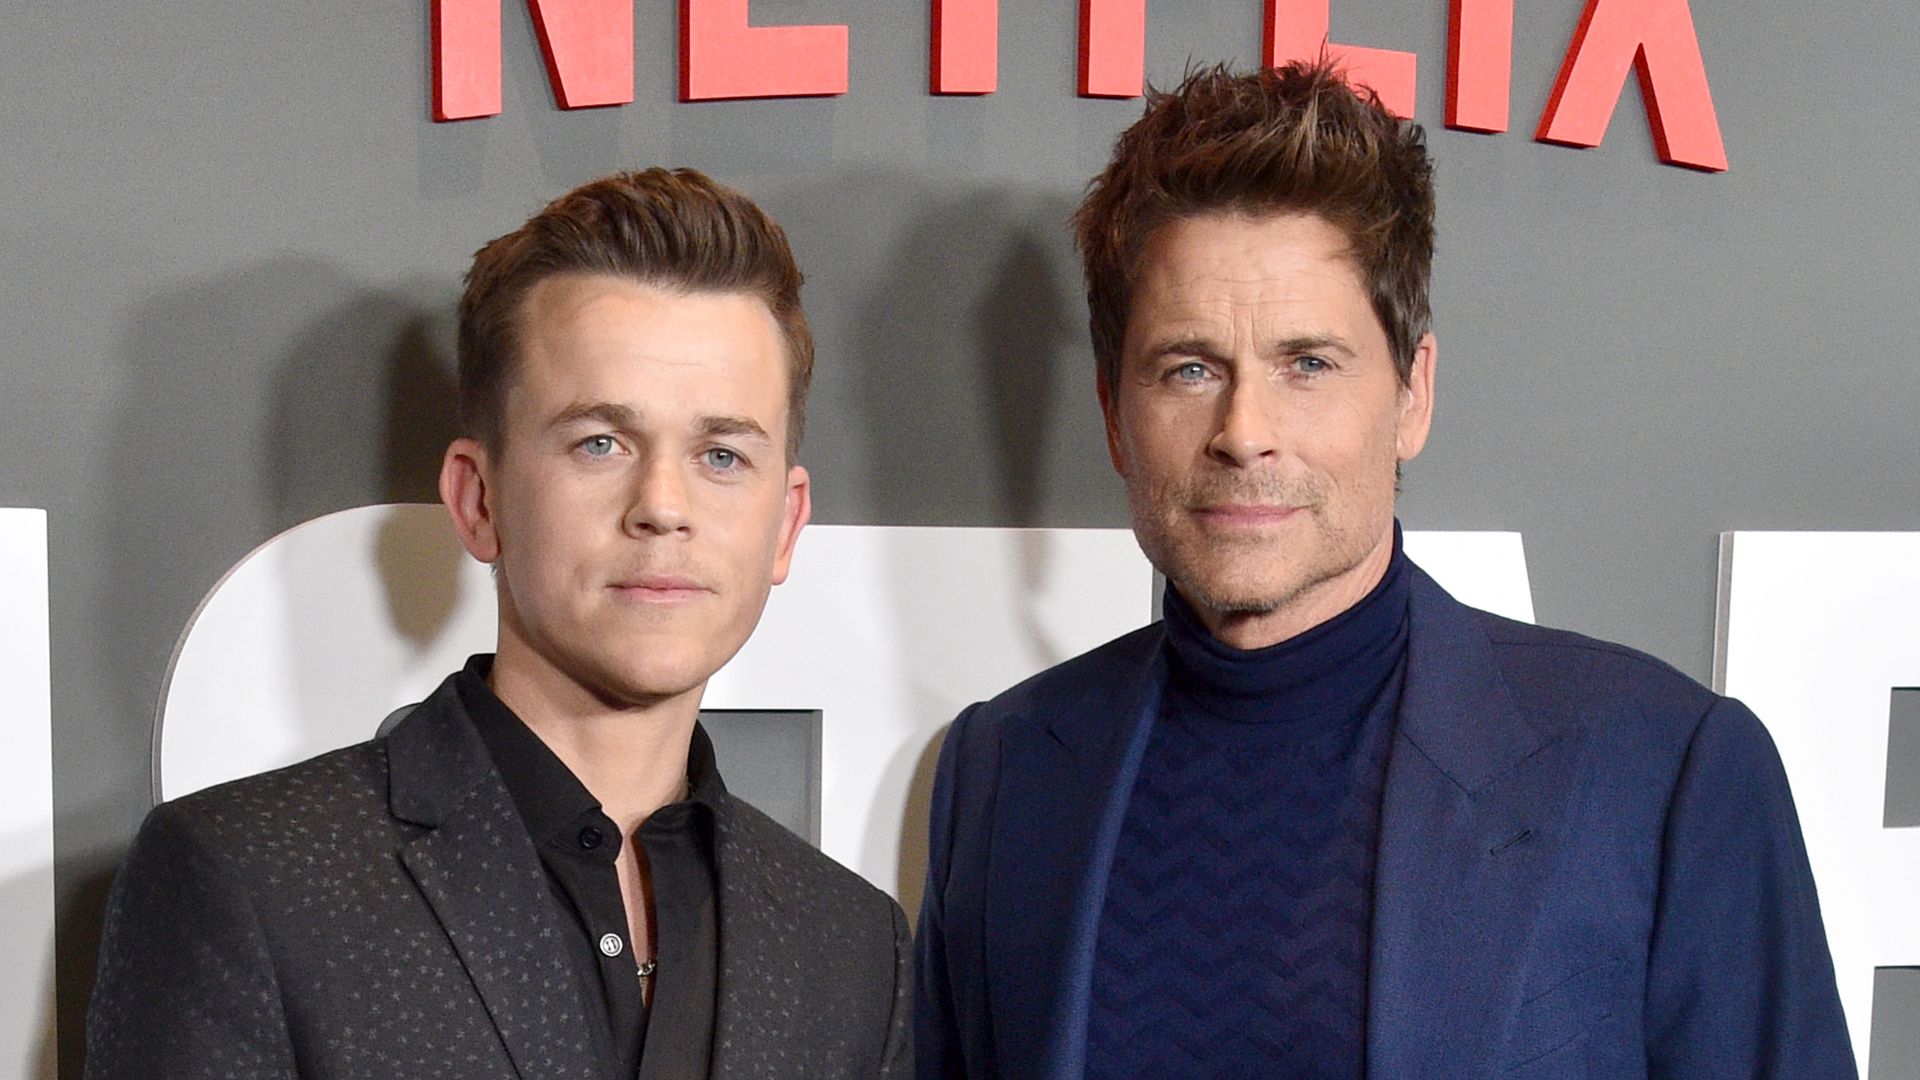 Rob Lowe's son John makes emotional confession about dad's support amid sobriety journey